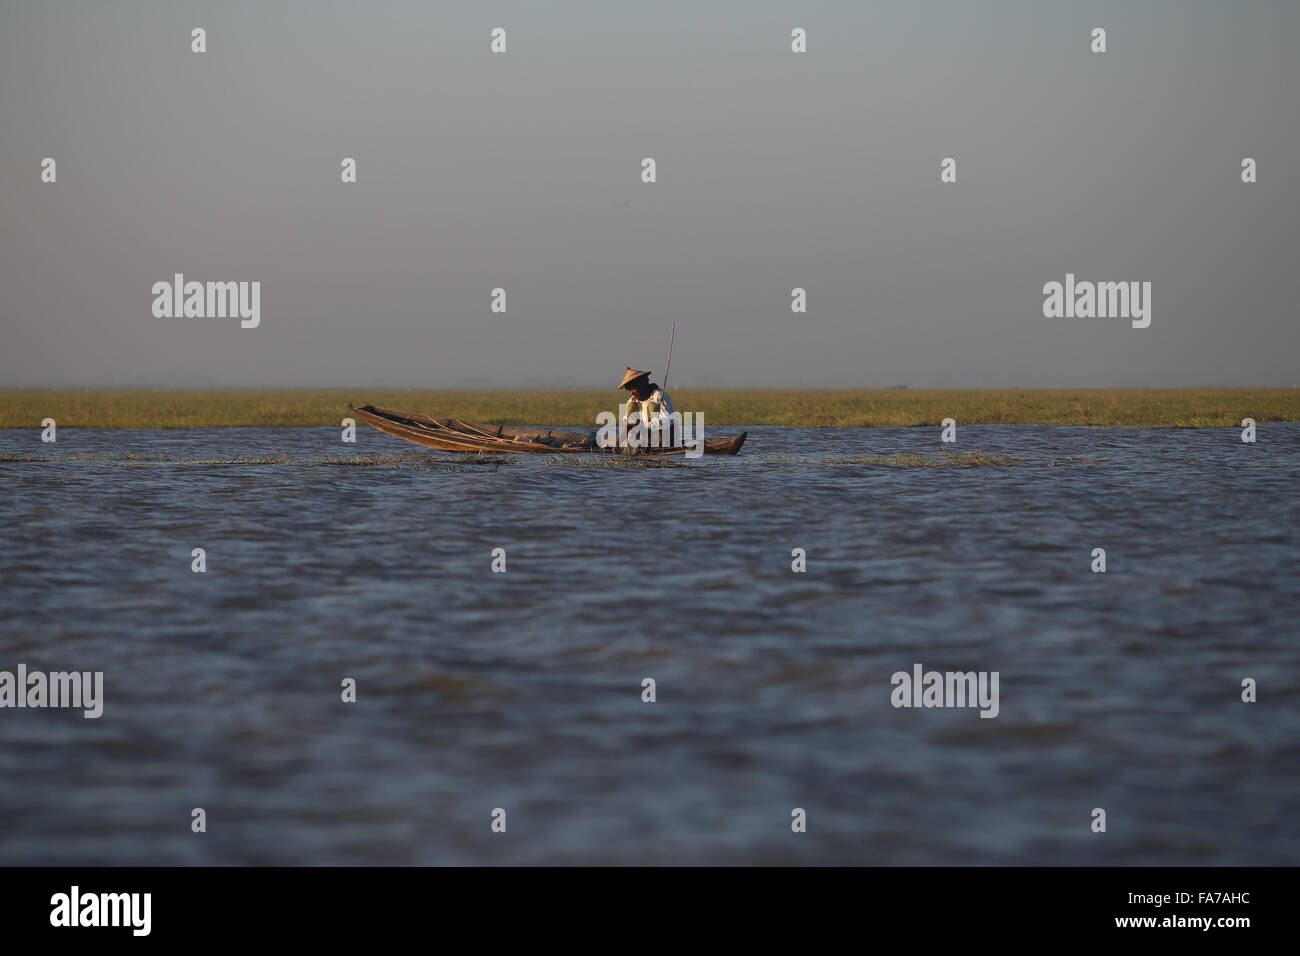 Bago, Myanmar. 23rd Dec, 2015. A fisherman works at Moeyungyi Wetland Wildlife Sanctuary in Bago region, Myanmar, Dec. 23, 2015. Moeyungyi Wetlands is situated in Bago Division. Every year, millions of birds usually fly from the northern hemisphere to the south along the East-Asian Australian Flyway to escape from winter. They stop to rest and feed in Asia. So the flyway contains a network of wetlands and Moeyungyi is one of which could cooperate to certain migrated as well as domestic birds. Credit:  U Aung/Xinhua/Alamy Live News Stock Photo